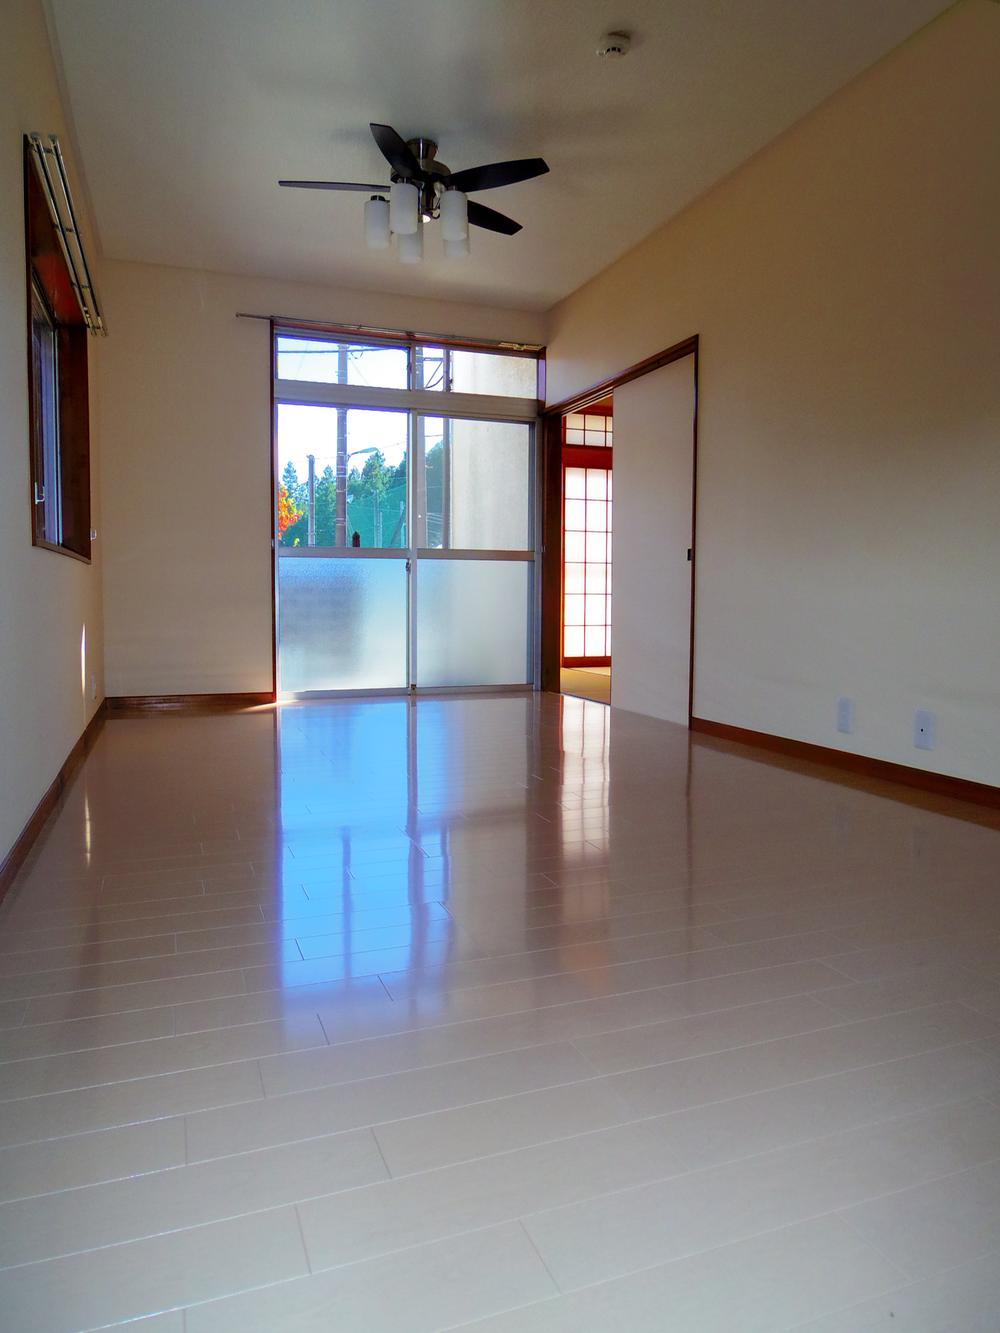 Living. Brightly, Per yang is good living. It also followed by a Japanese-style room, There is a sense of openness.